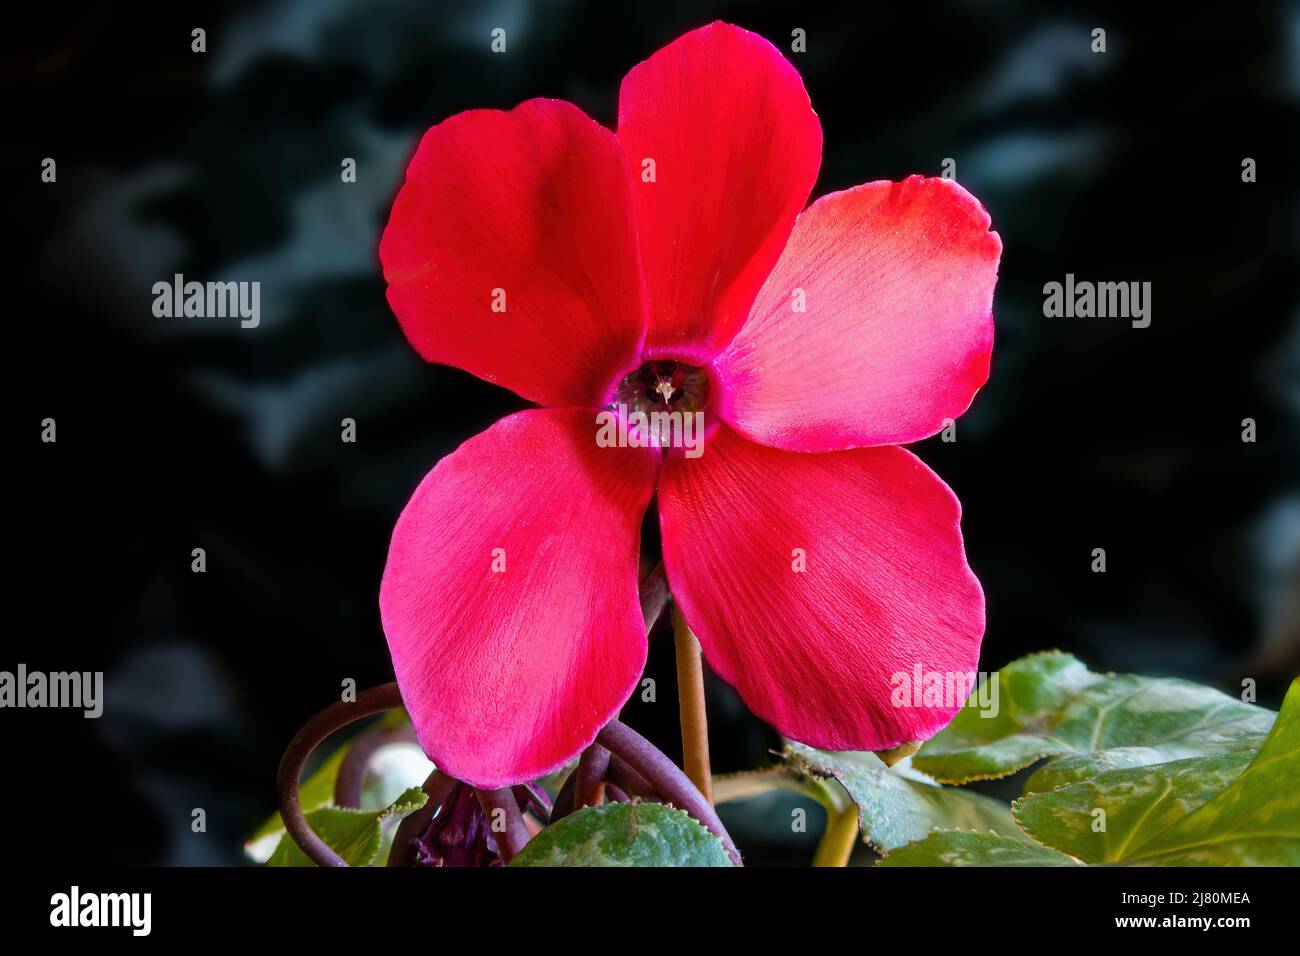 Red flower of Cyclamen persicum mill, Alpine violet or the Persian cyclamen, is a species of flowering herbaceous perennial plant growing from a tuber Stock Photo